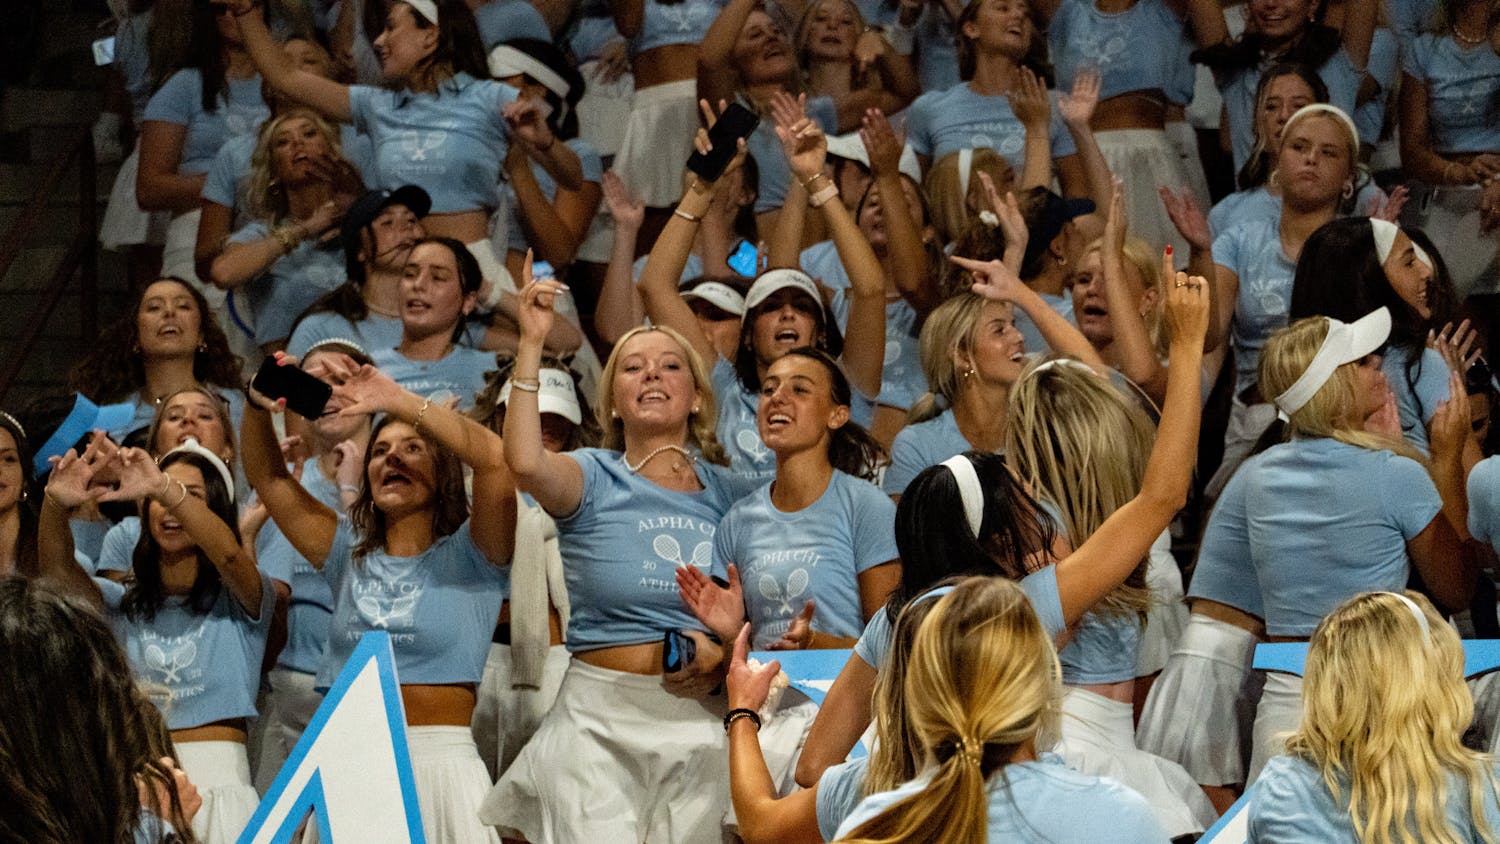 USC Sororities gathered Sunday afternoon, Aug. 21, 2022 at the Colonial Life Arena in costumes and sorority shirts to celebrate Bid Day. New members ran out of the Colonial Life tunnels to join their sororities at the center of the arena.